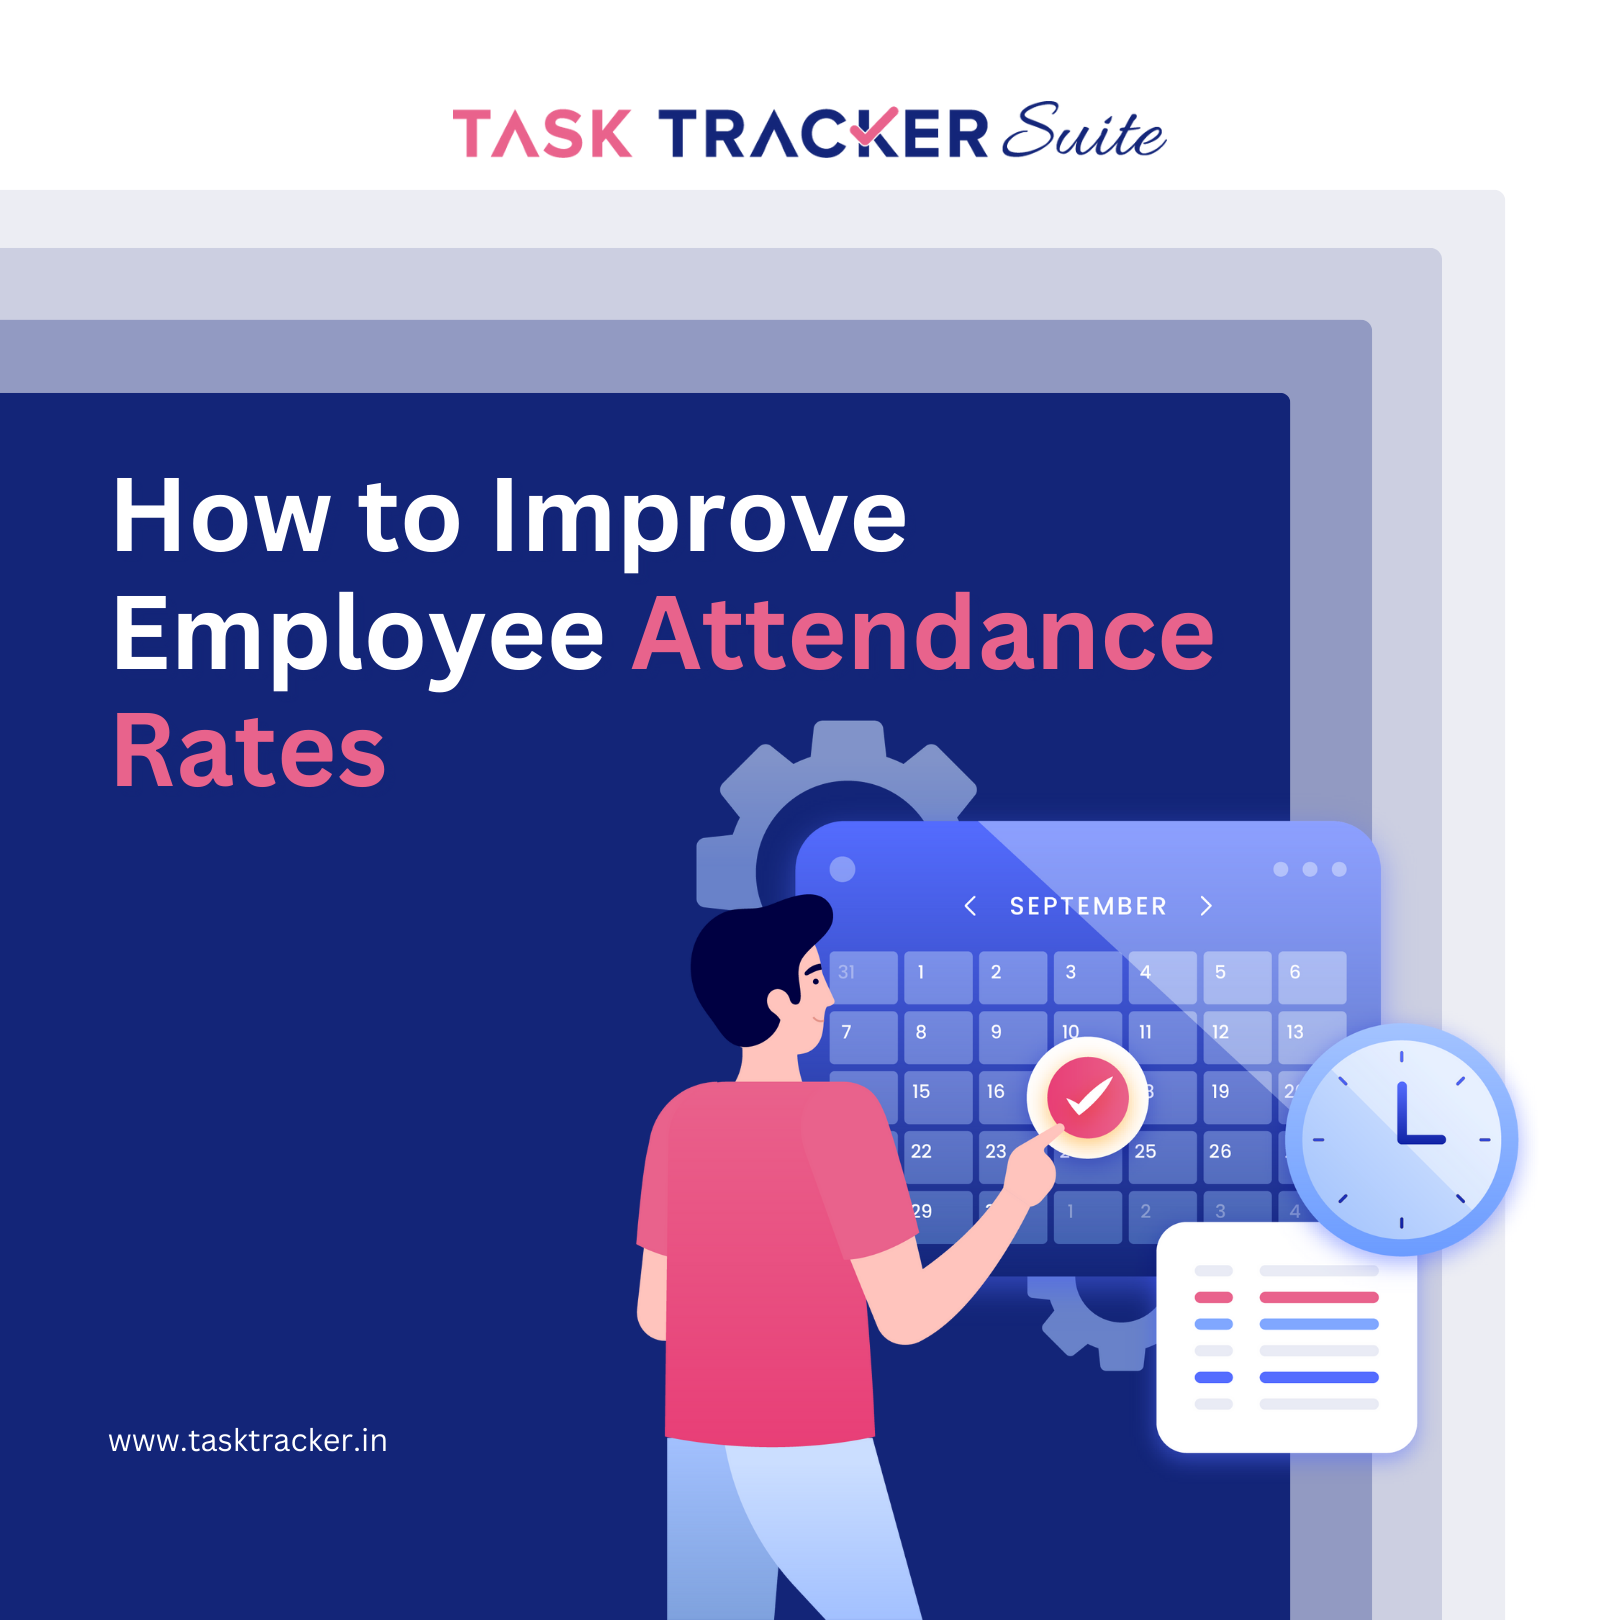 How to Improve Employee Attendance Rates